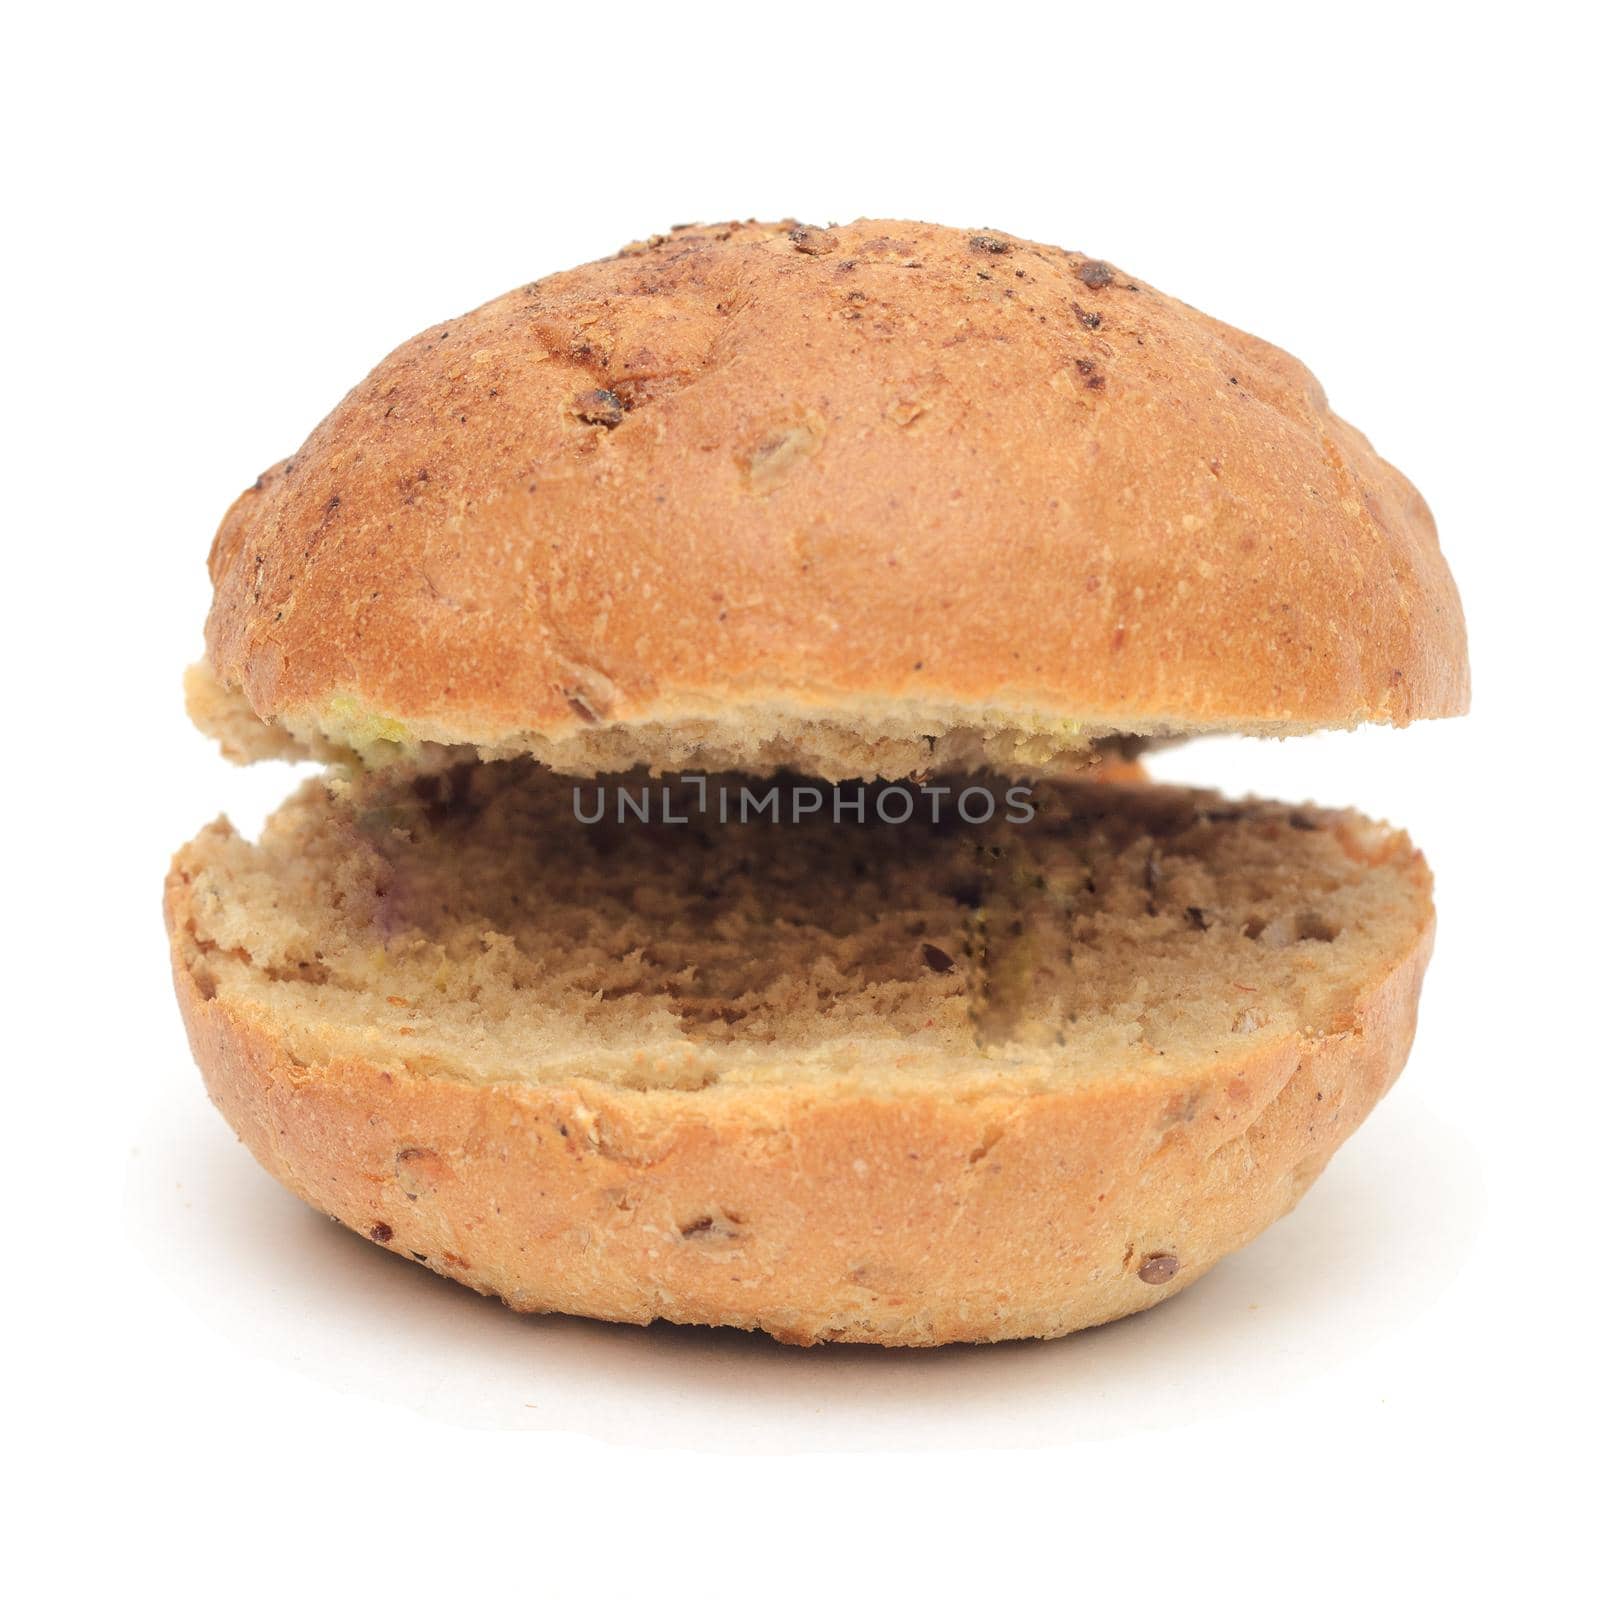 Burger bun with flax cut into two halves on one side isolated on white background.Funny burger bun